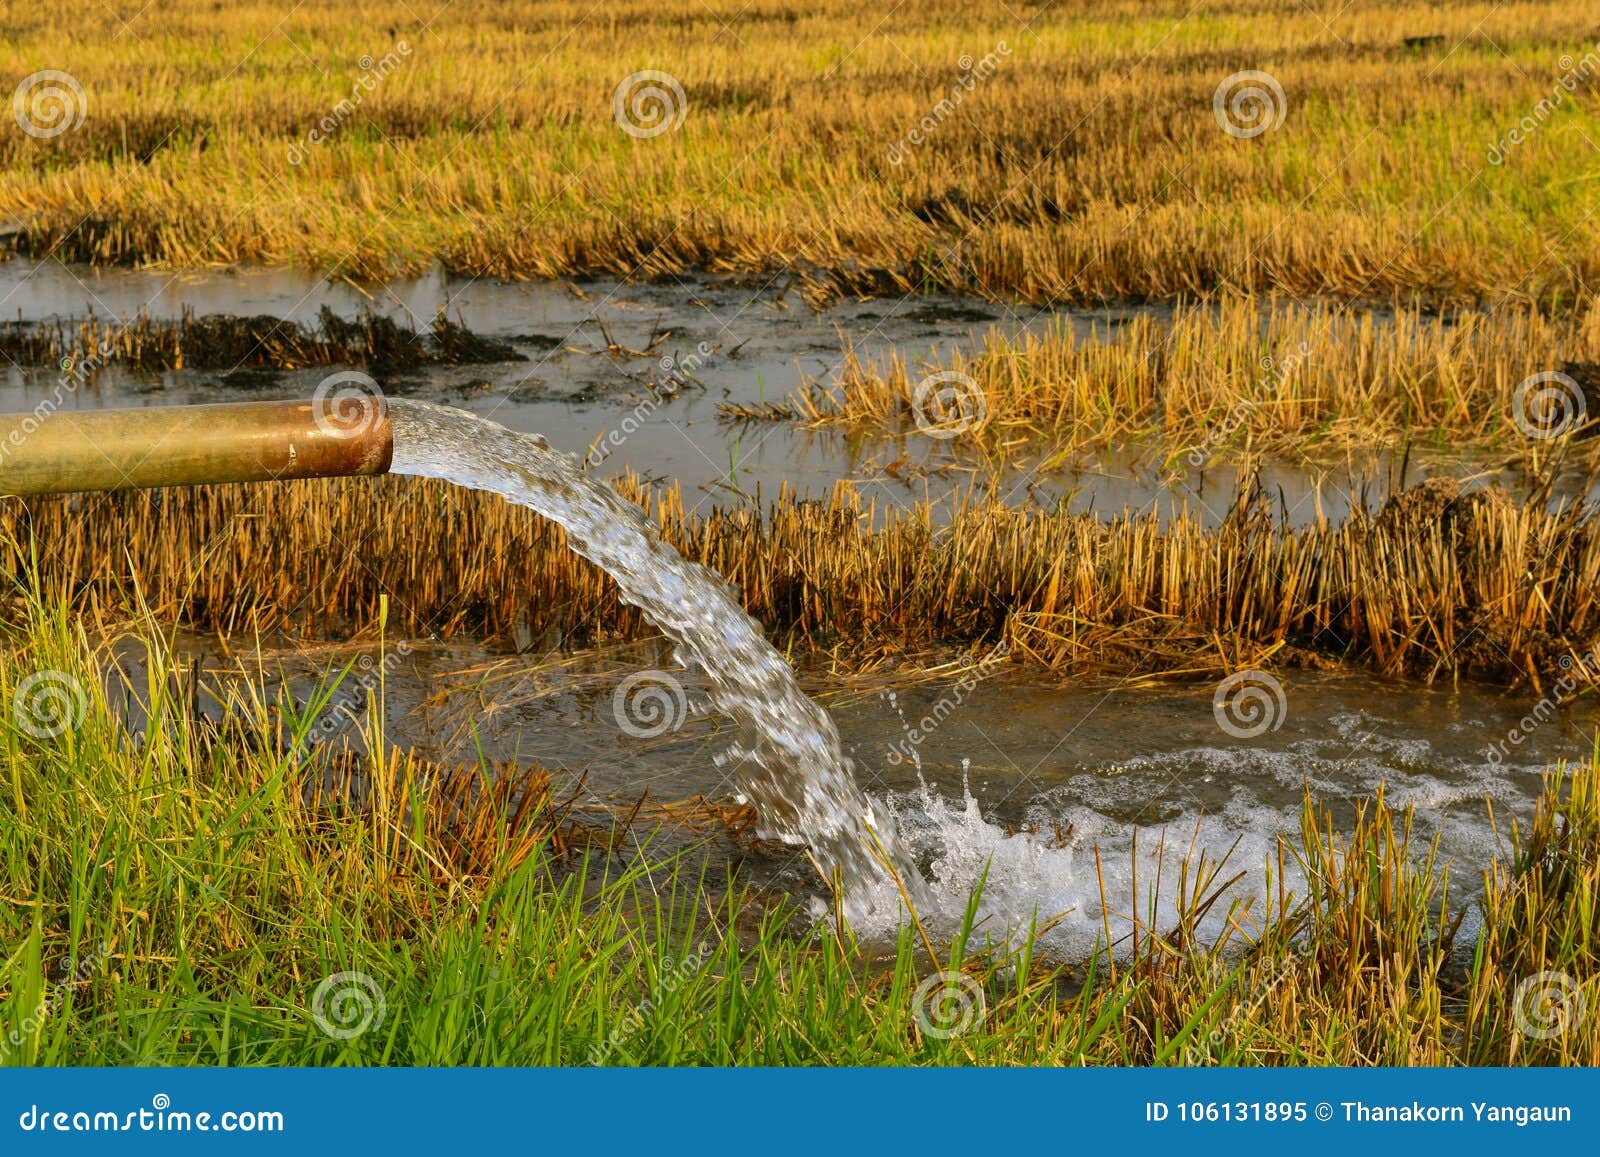 pumping water into the fields.